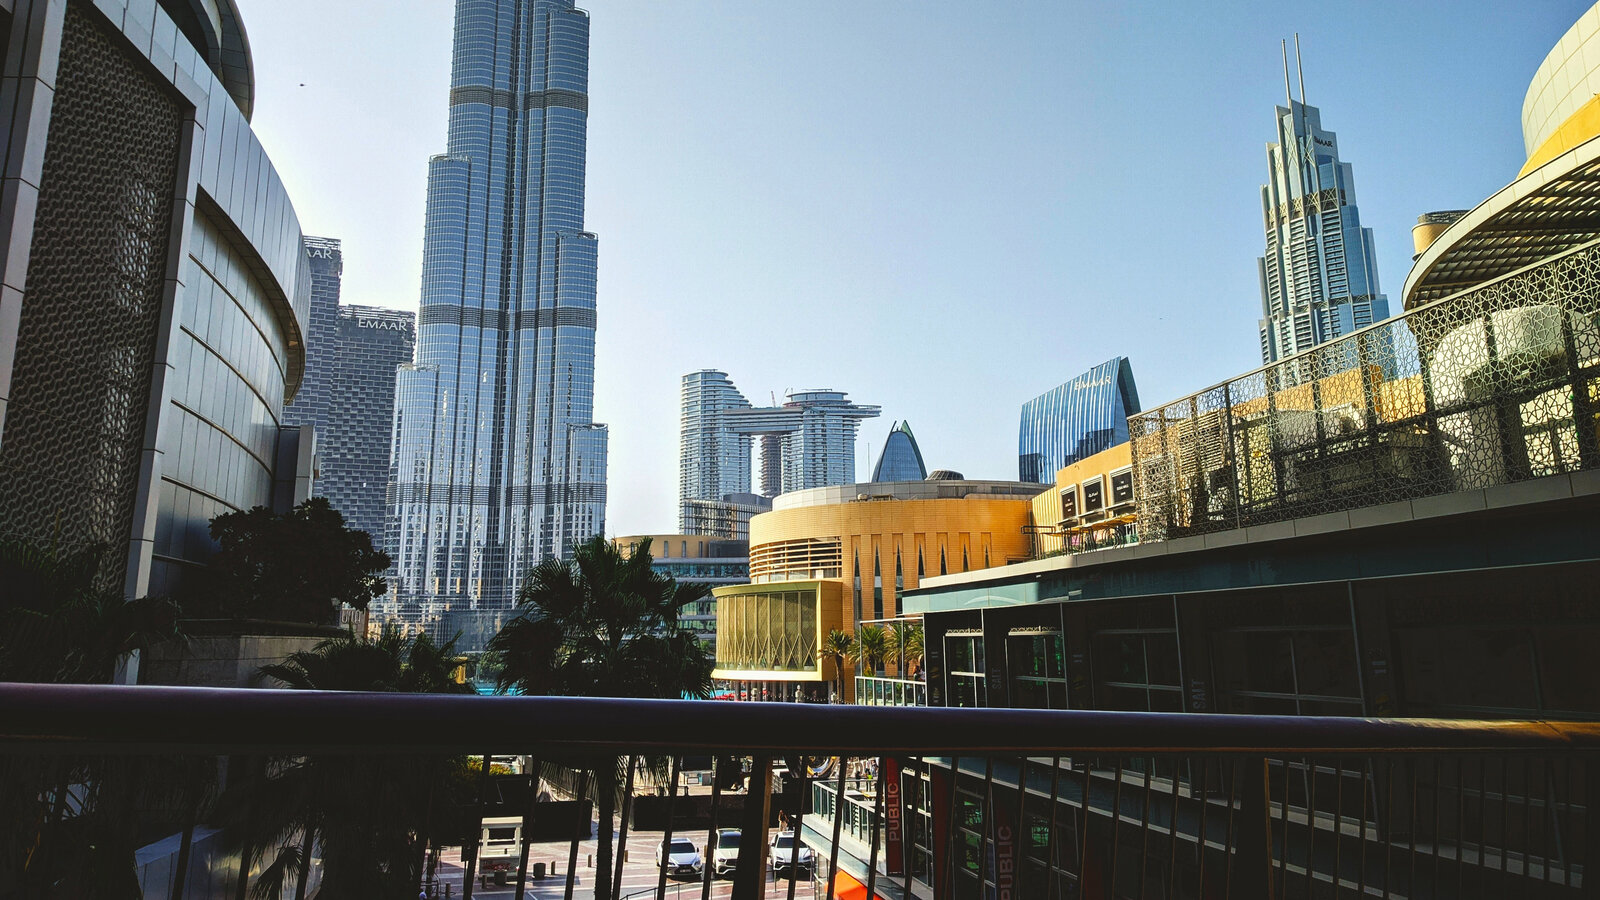 Moving to Downtown Dubai? Here’s What to Expect